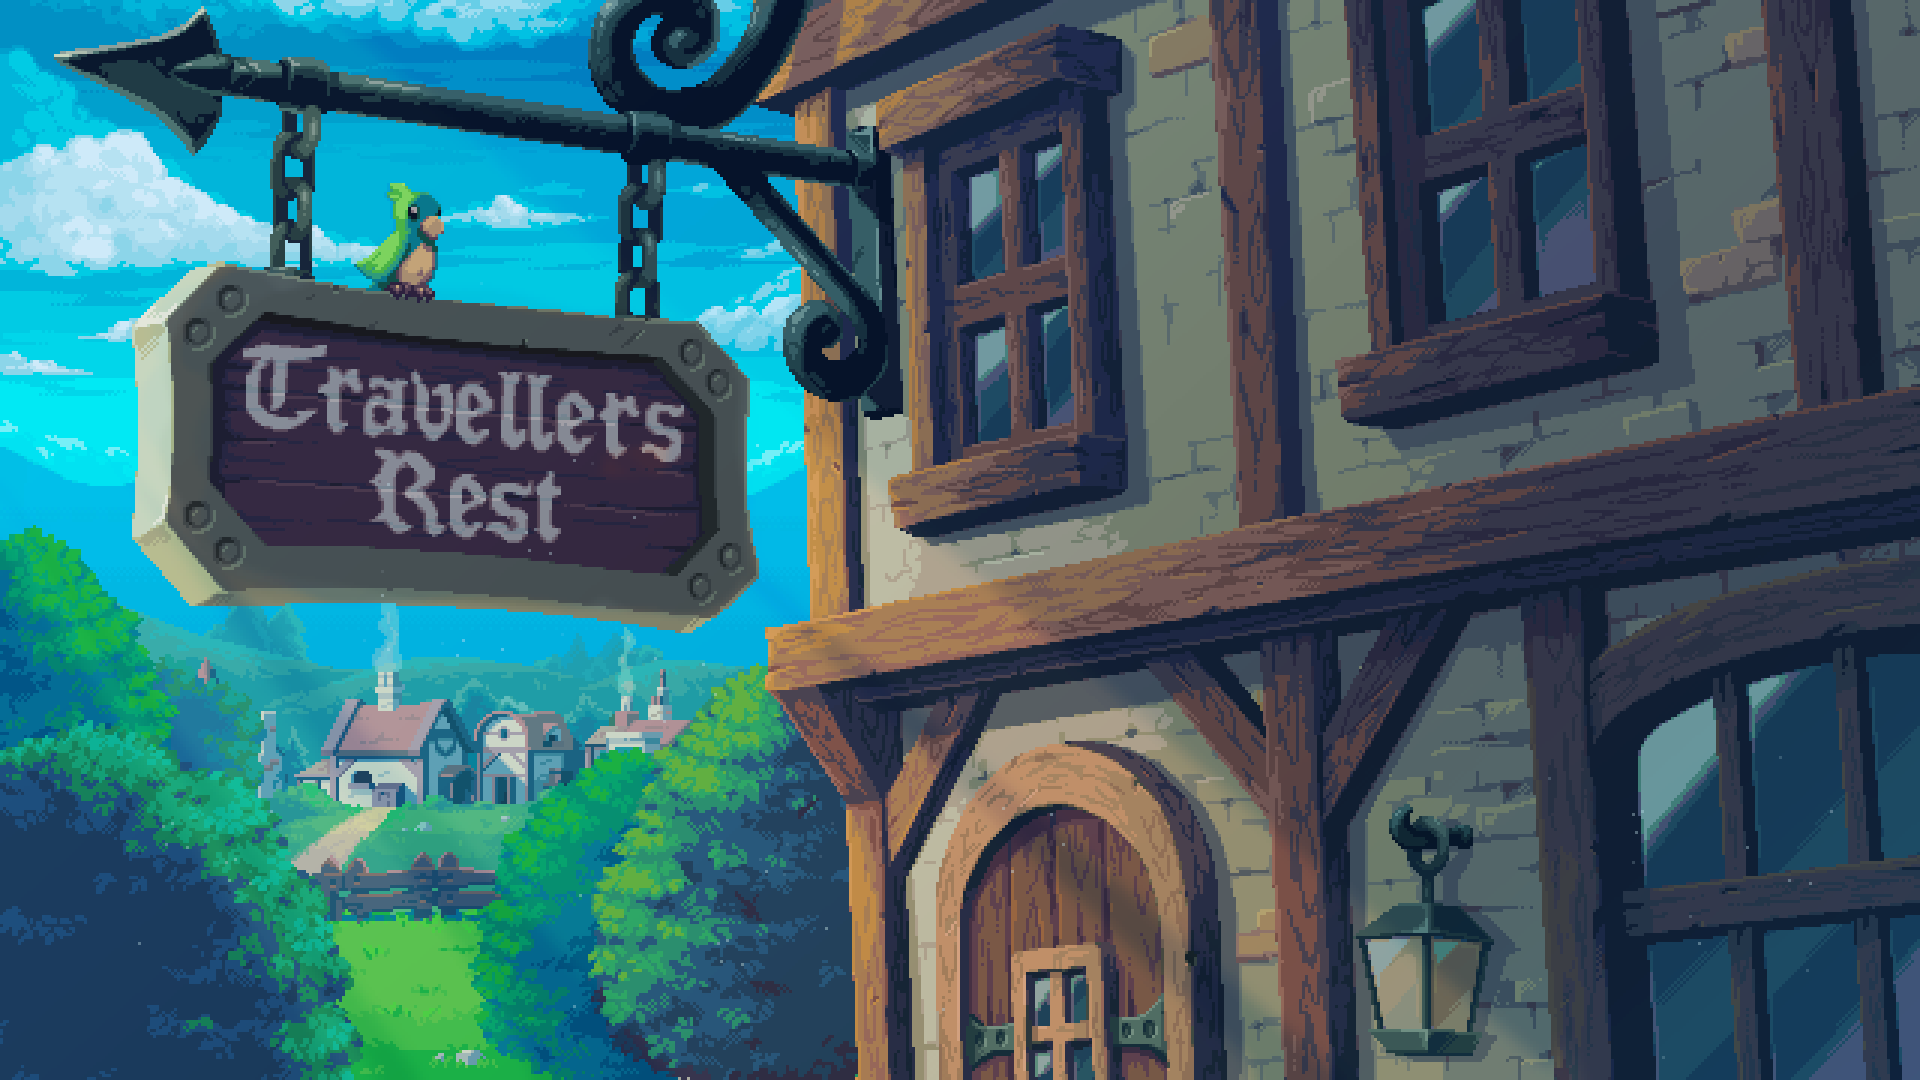 Travellers Rest on Steam